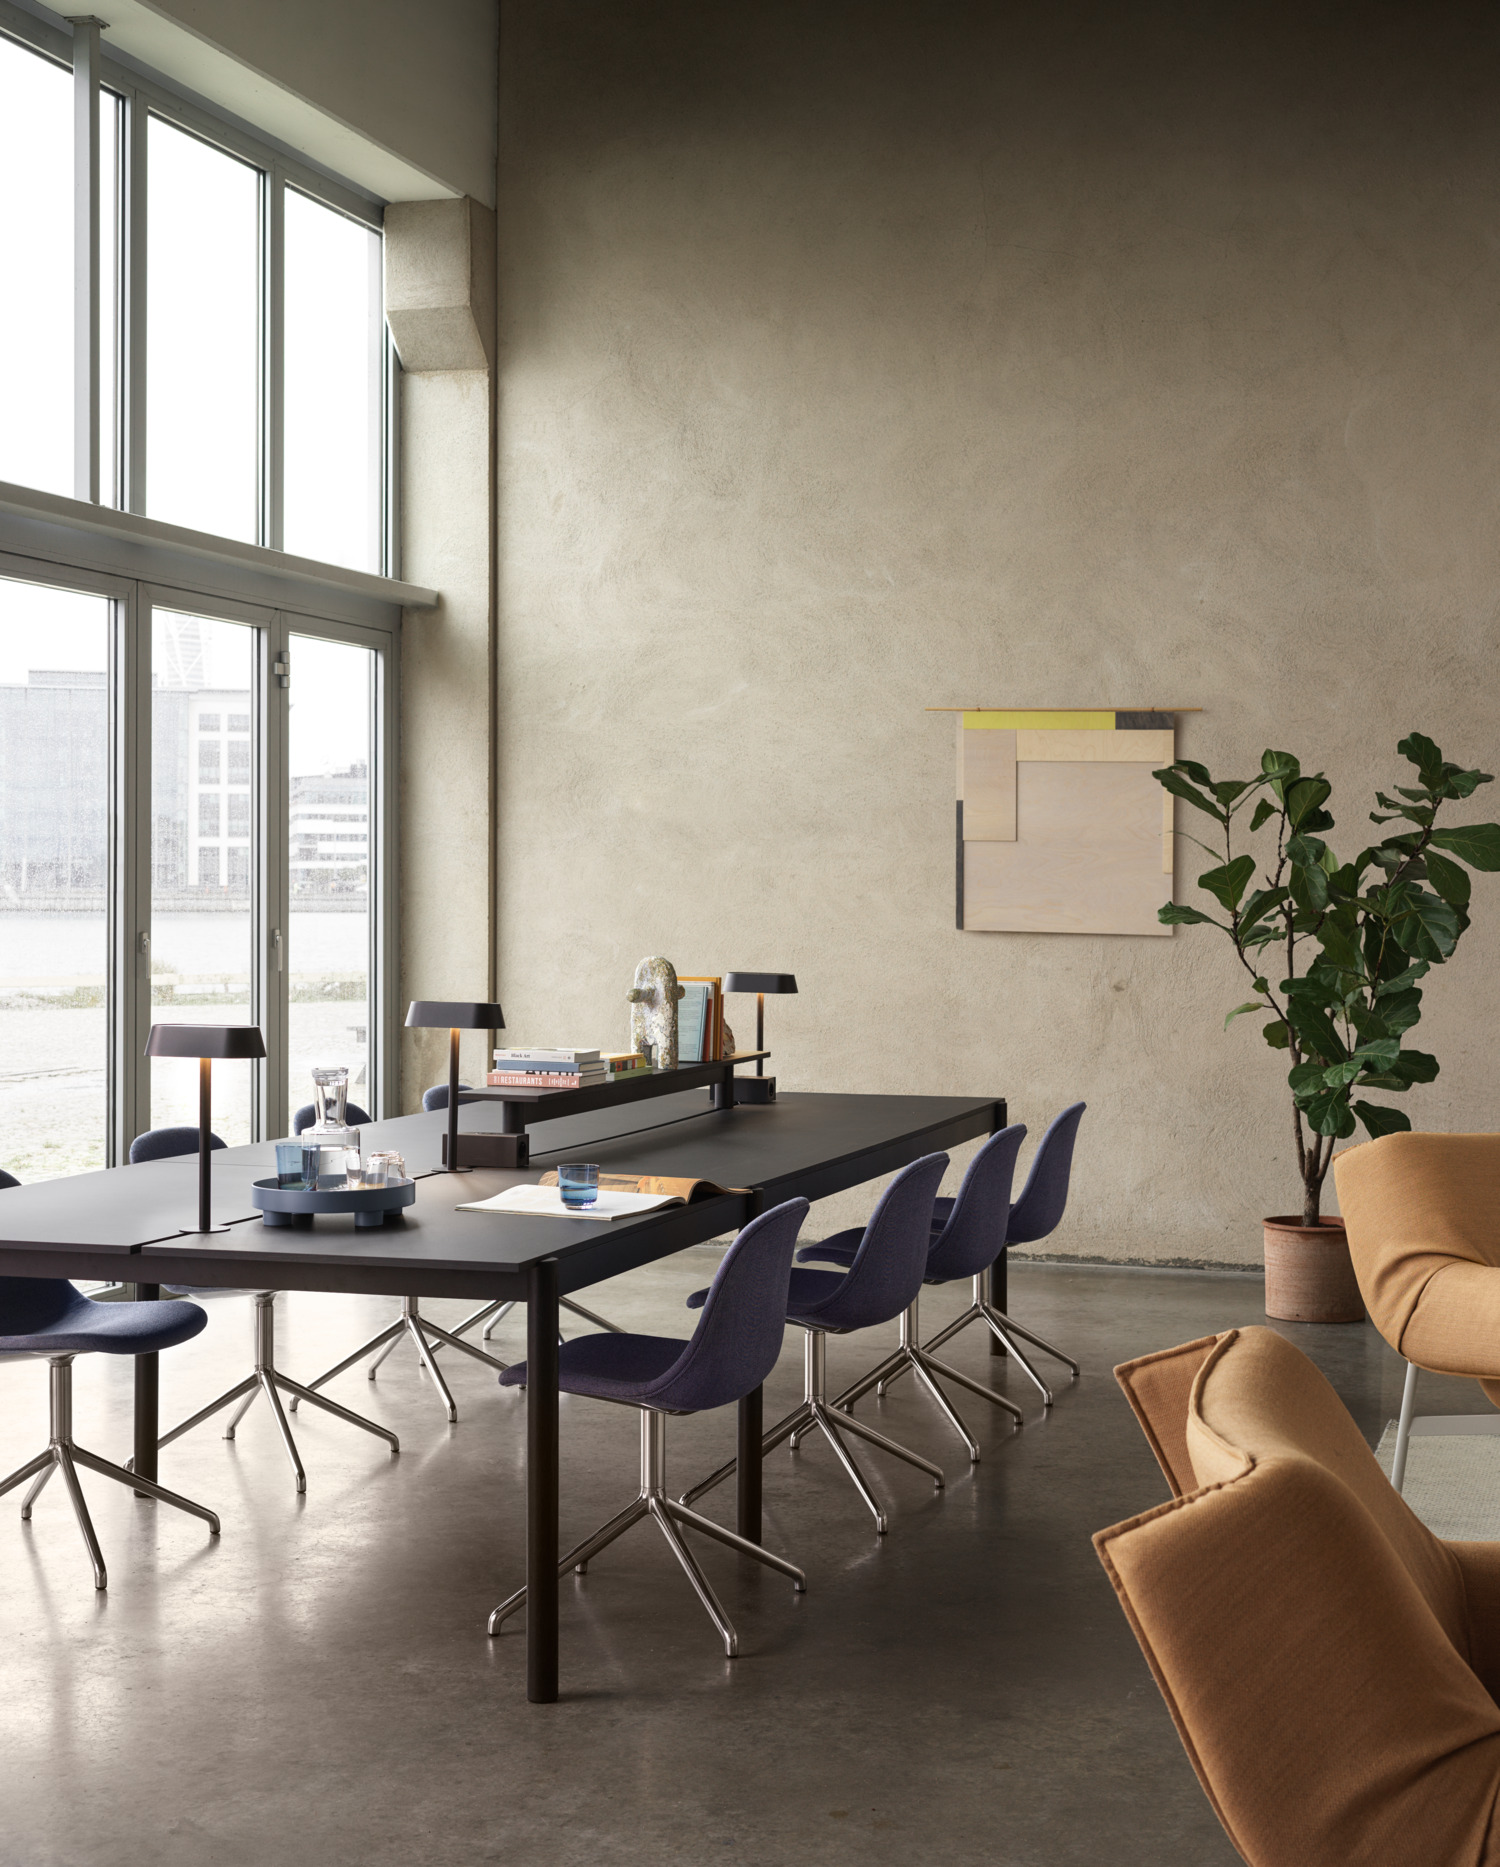 Linear System Table Config. 1 in Black/Black, Fiber Side Chair w. Swivel Base in Sabi 631/Aluminium, Wrap Lounge Chair in Fiord 451/Grey, Ply Rug in Off-White, Platform Tray in Blue-Grey, Raise Glasses in Dark Blue, Raise Carafe in Clear